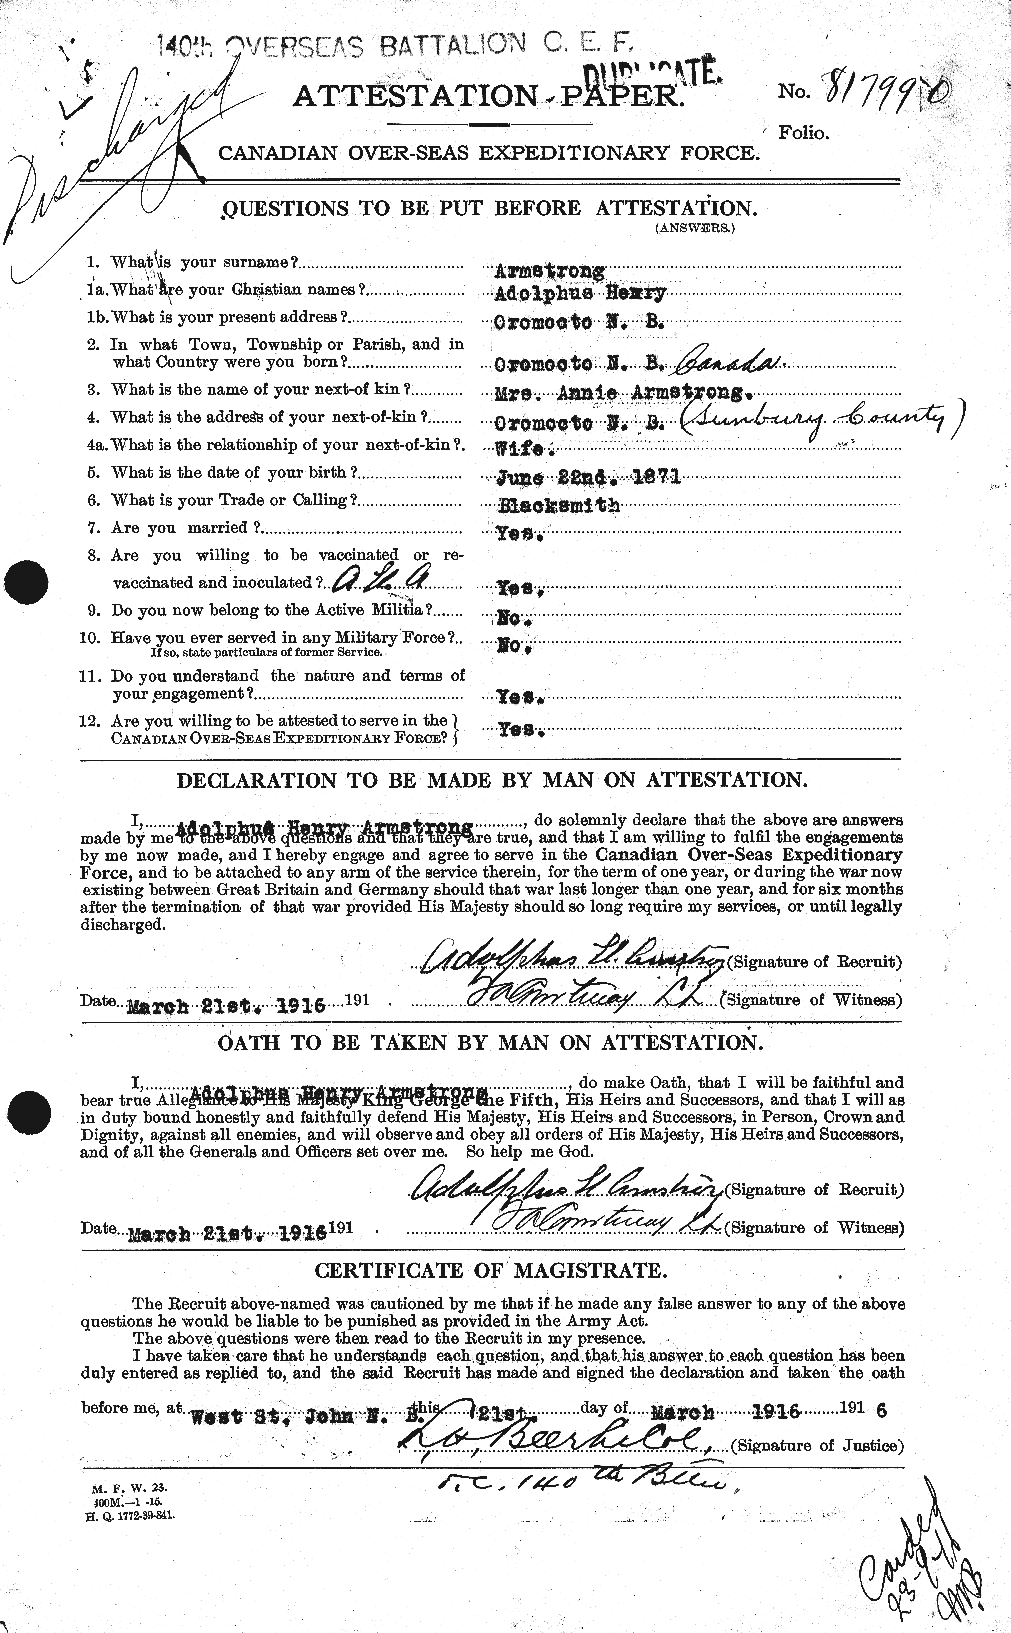 Personnel Records of the First World War - CEF 214001a